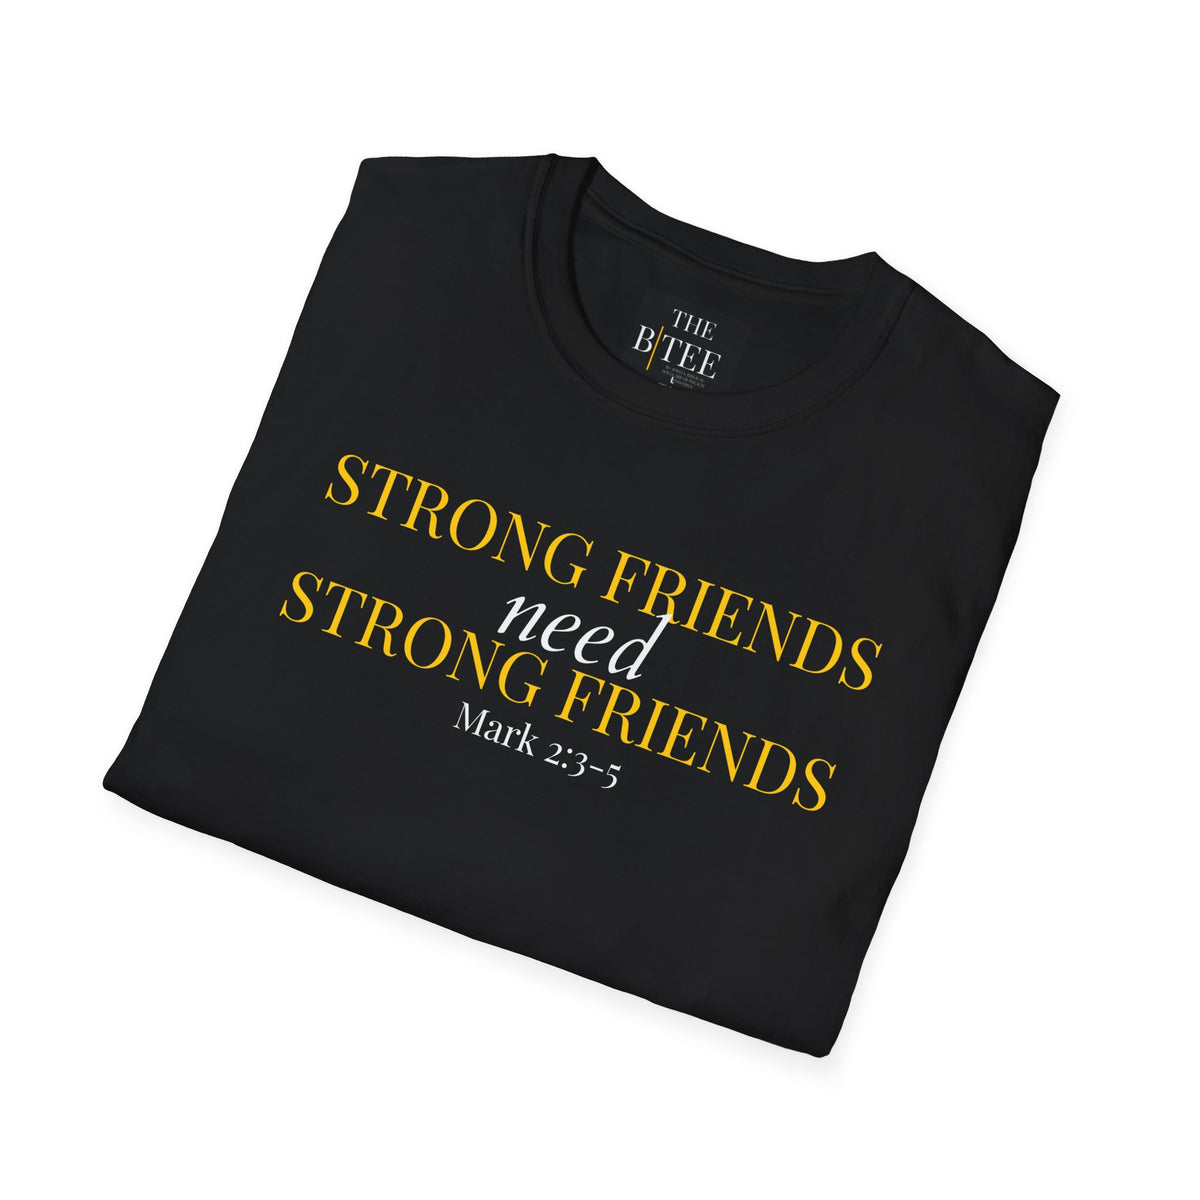 STRONG FRIENDS NEED STRONG FRIENDS